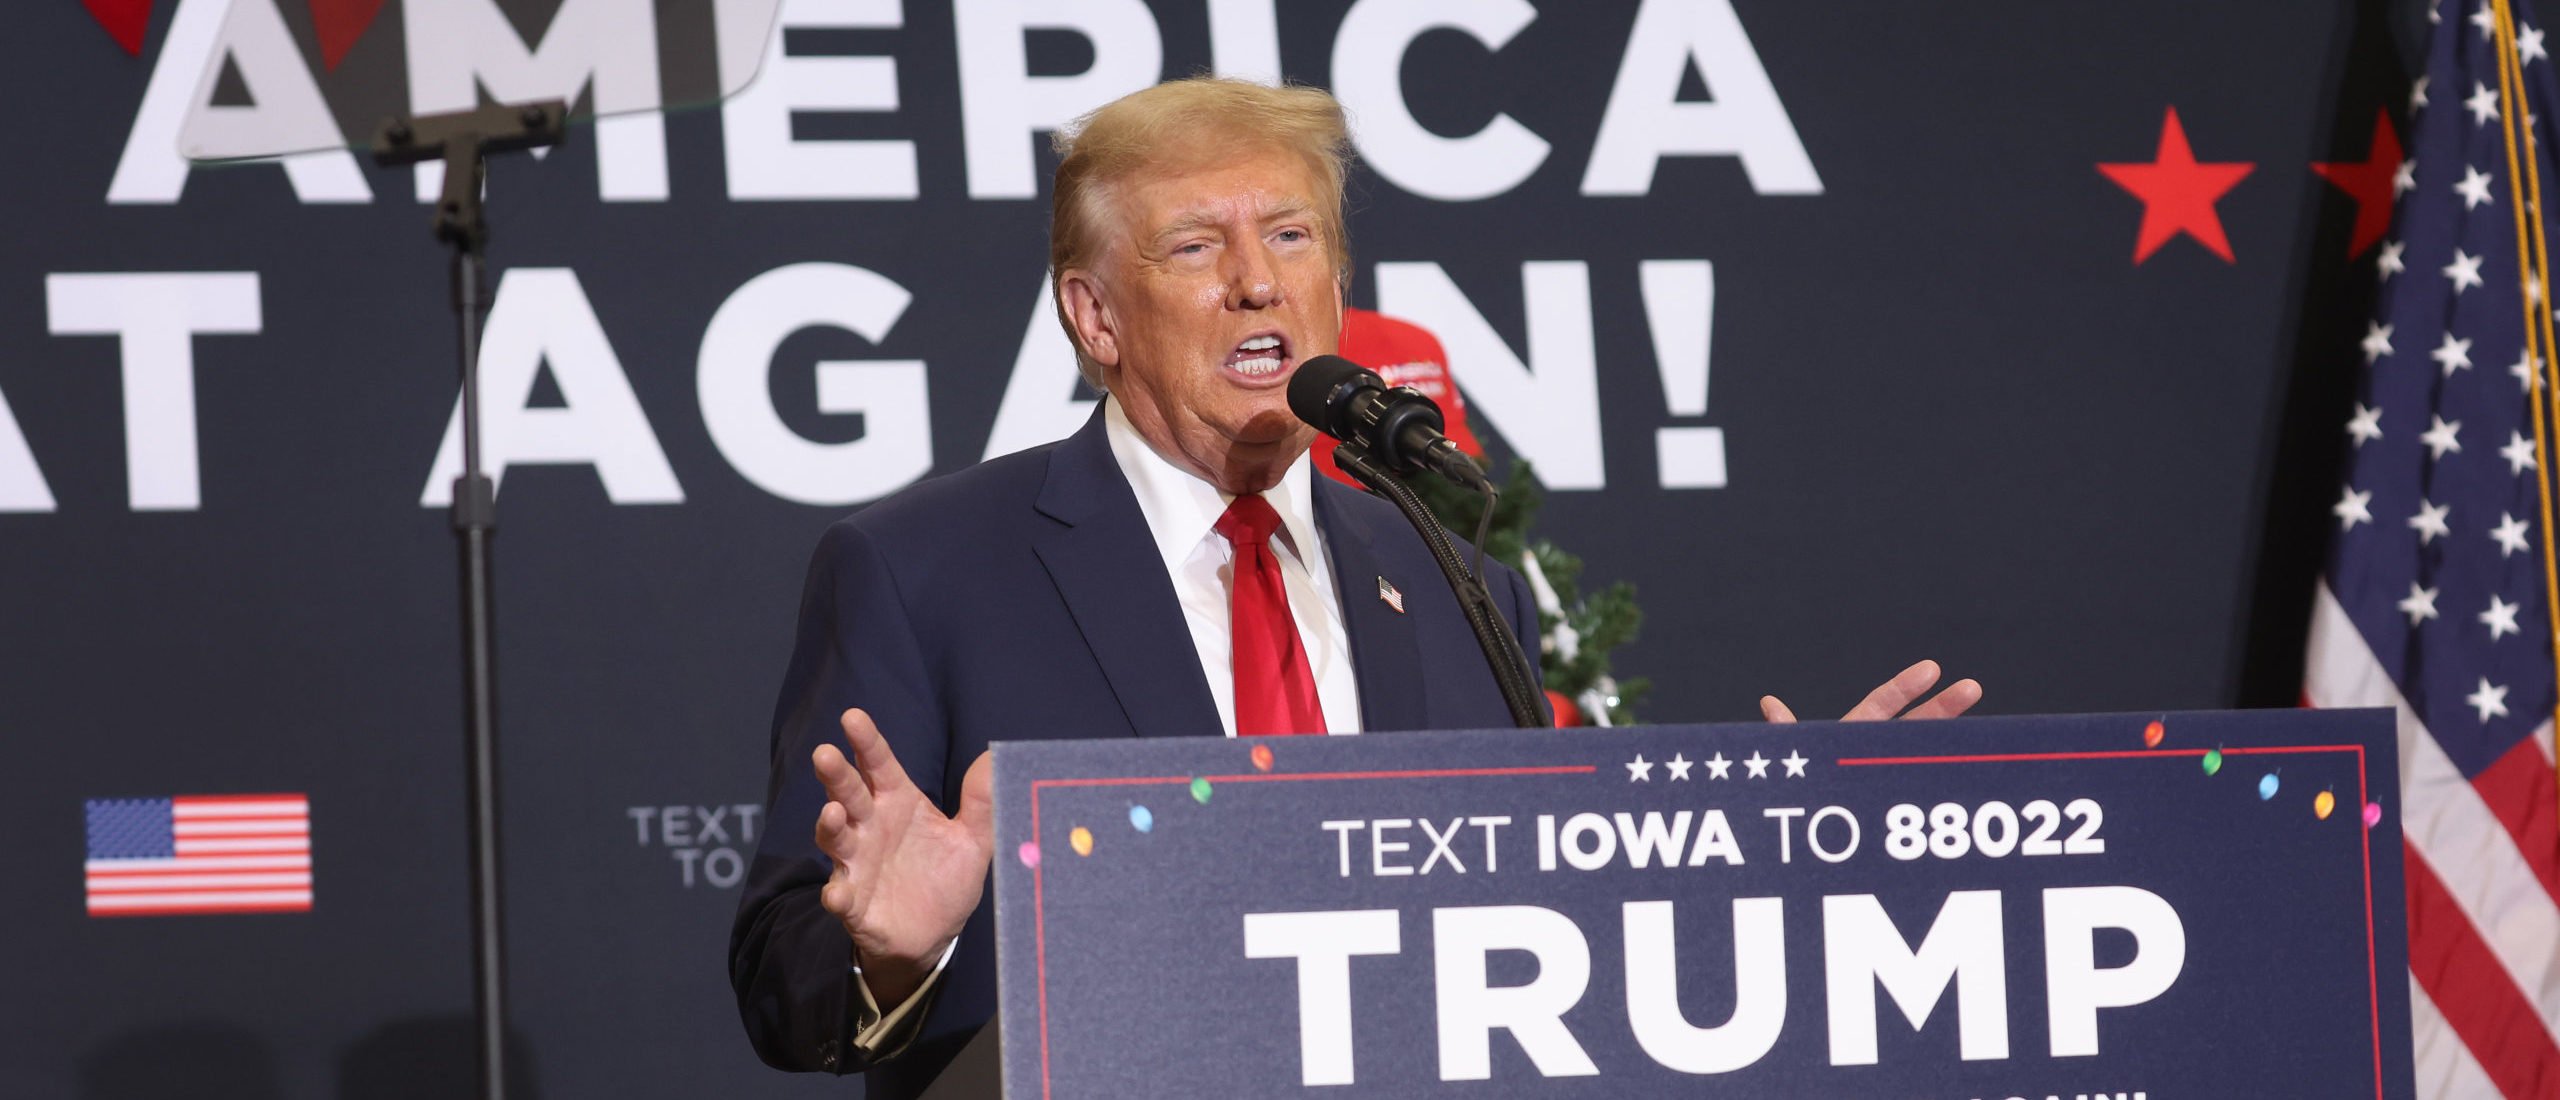 WATERLOO, IOWA - DECEMBER 19: Republican presidential candidate and former U.S. President Donald Trump speaks to guests at a campaign event on December 19, 2023 in Waterloo, Iowa. Iowa Republicans will be the first to select their party's nomination for the 2024 presidential race, when they go to caucus on January 15, 2024. (Photo by Scott Olson/Getty Images)